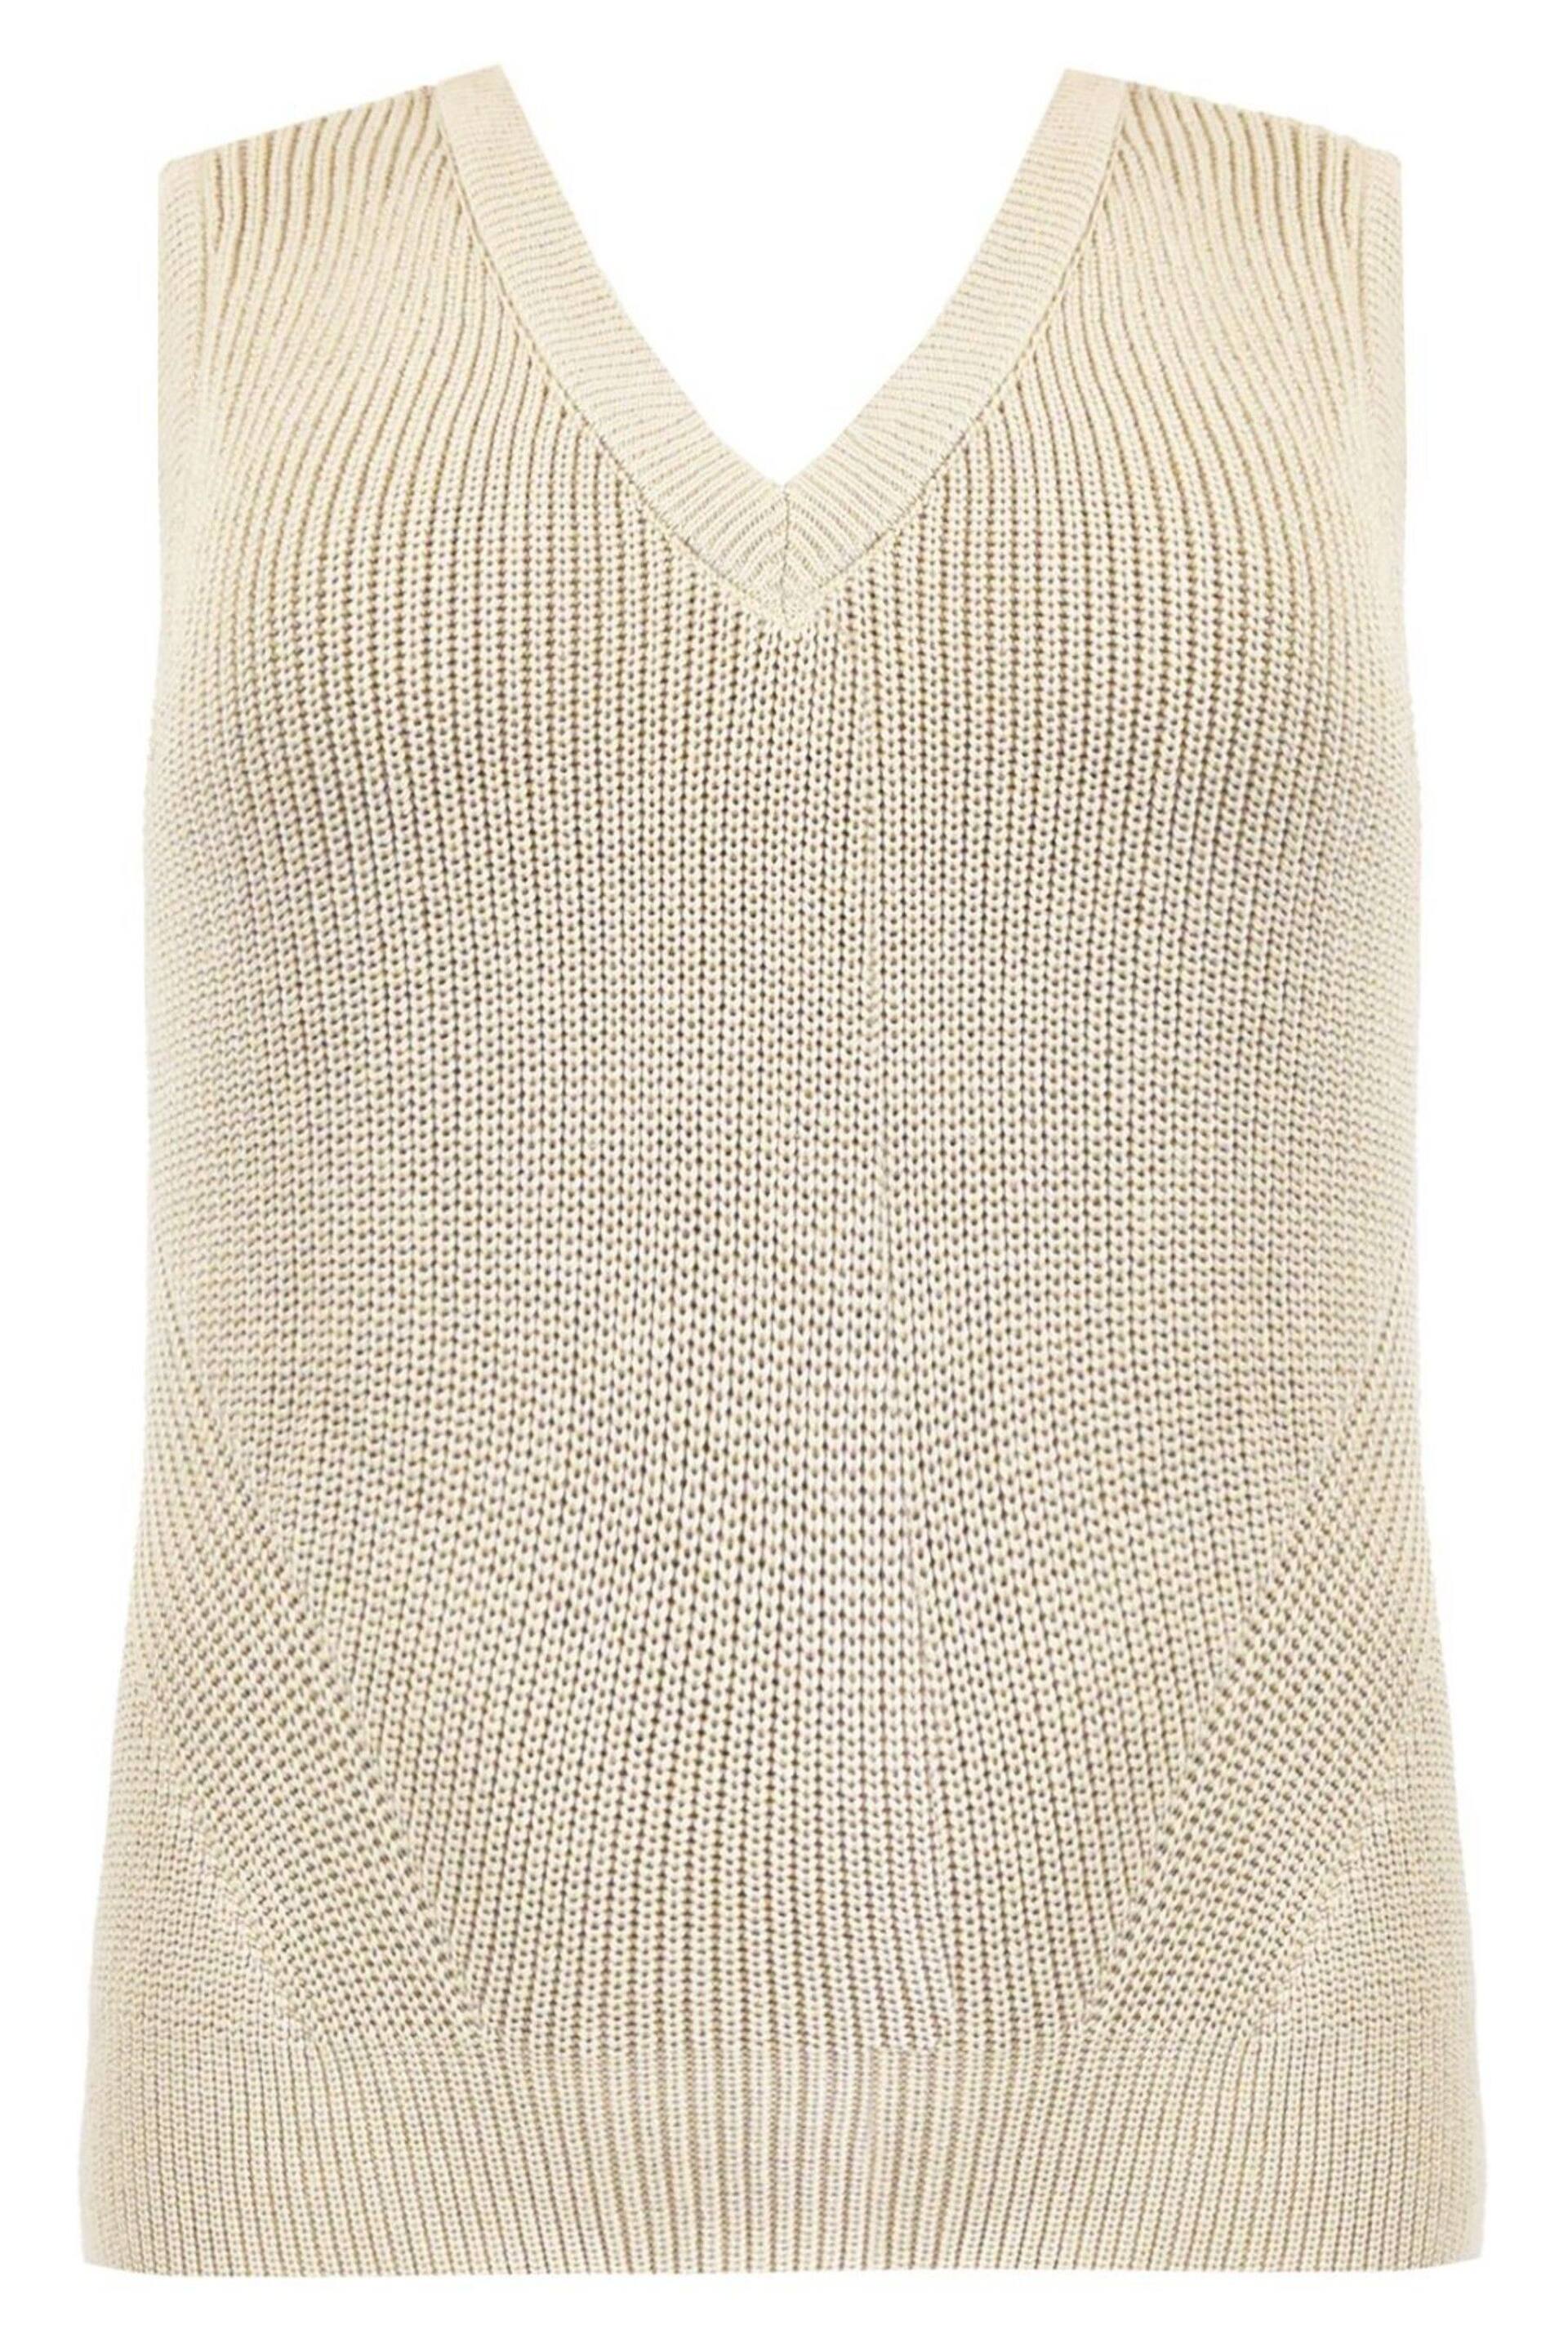 Live Unlimited Beige Knitted Tank Top - Image 5 of 5